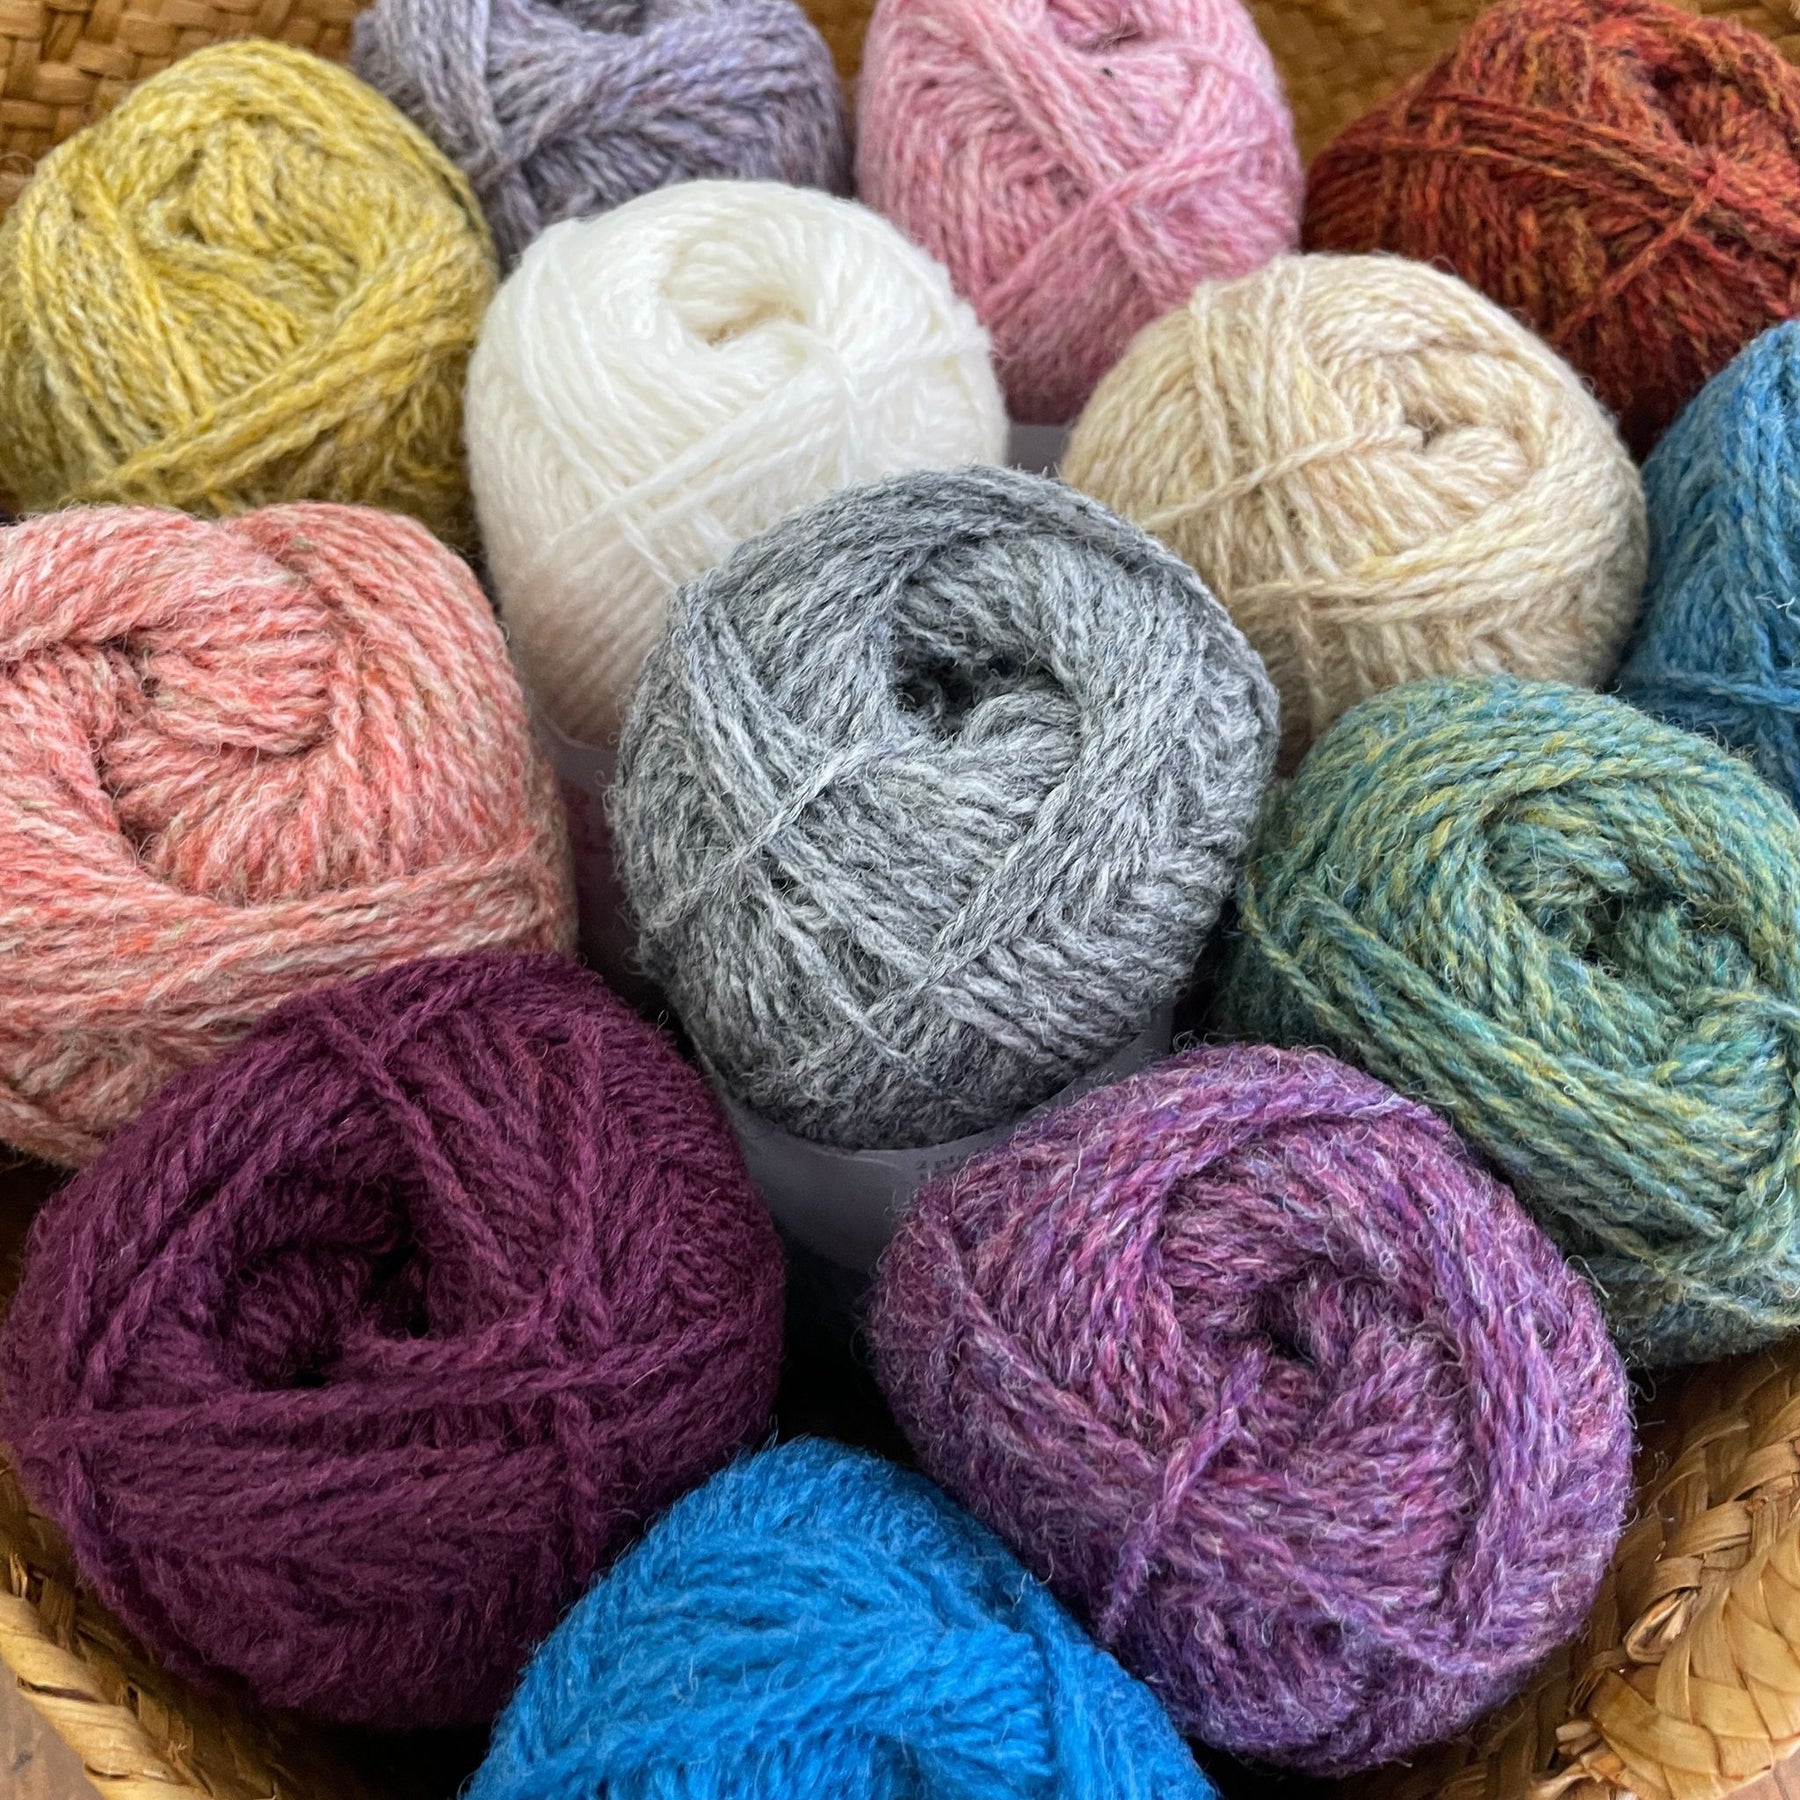 Jamieson & Smith 2ply Jumper Weight Wool Yarn in various colors arranged in basket. Viewed from above.